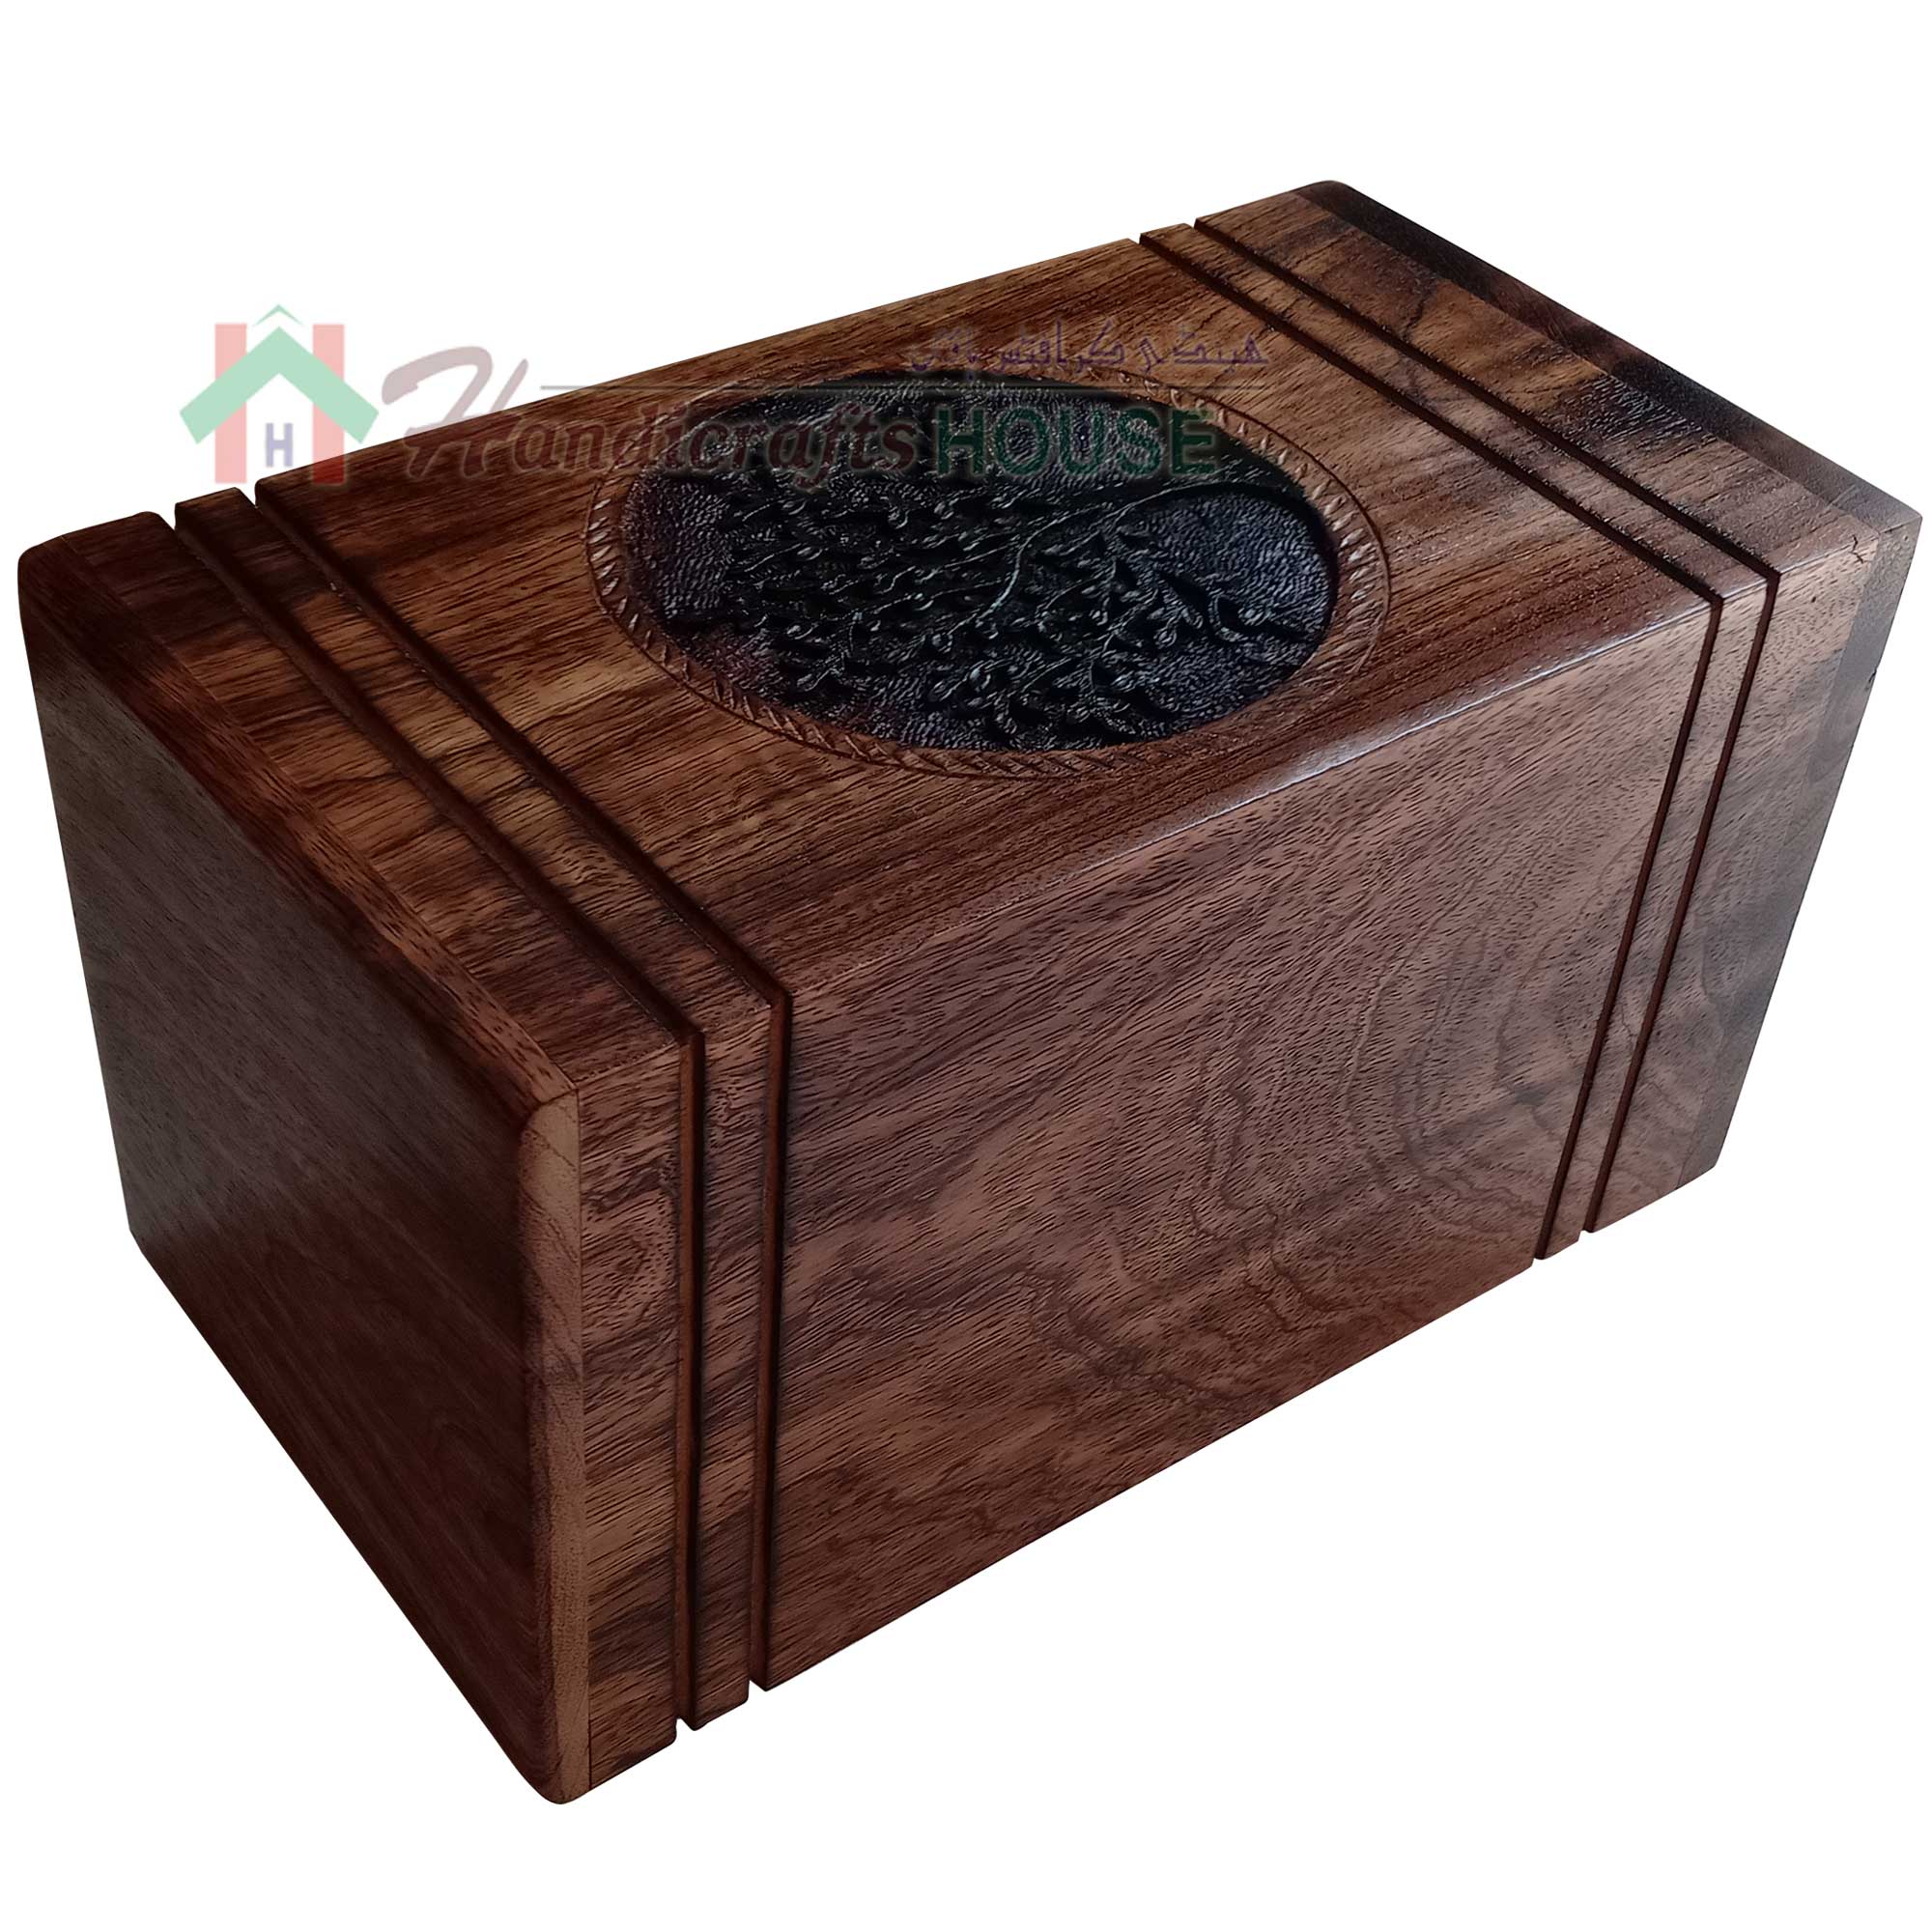 Tree of Life Wooden Cremation Urns for Human and Pet Ashes, Memorials Urns for Adult